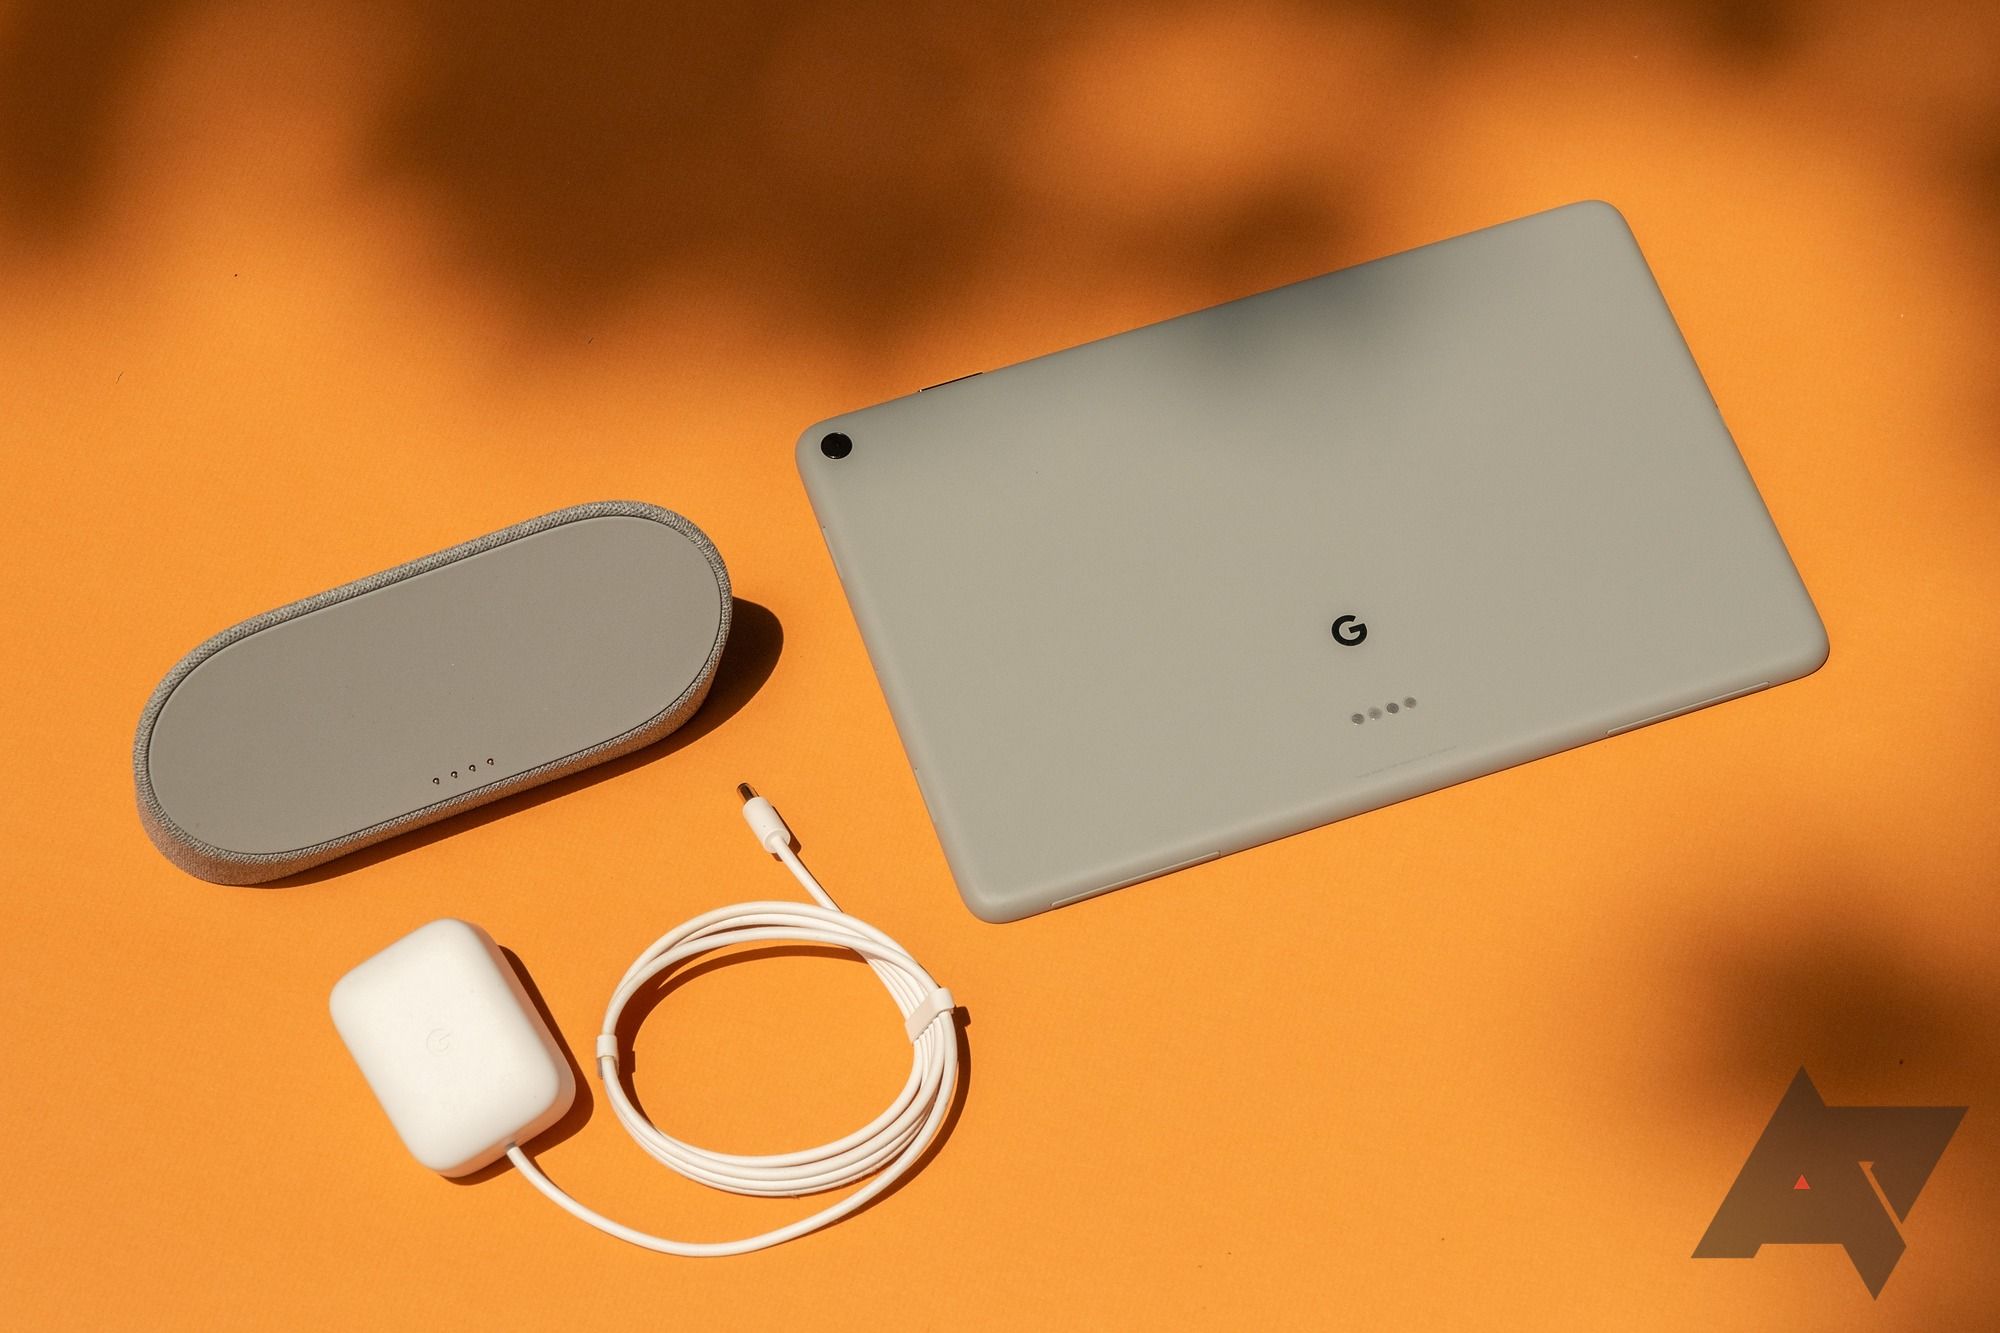 Google Pixel Tablet: Release date, price, specs, features, and more!